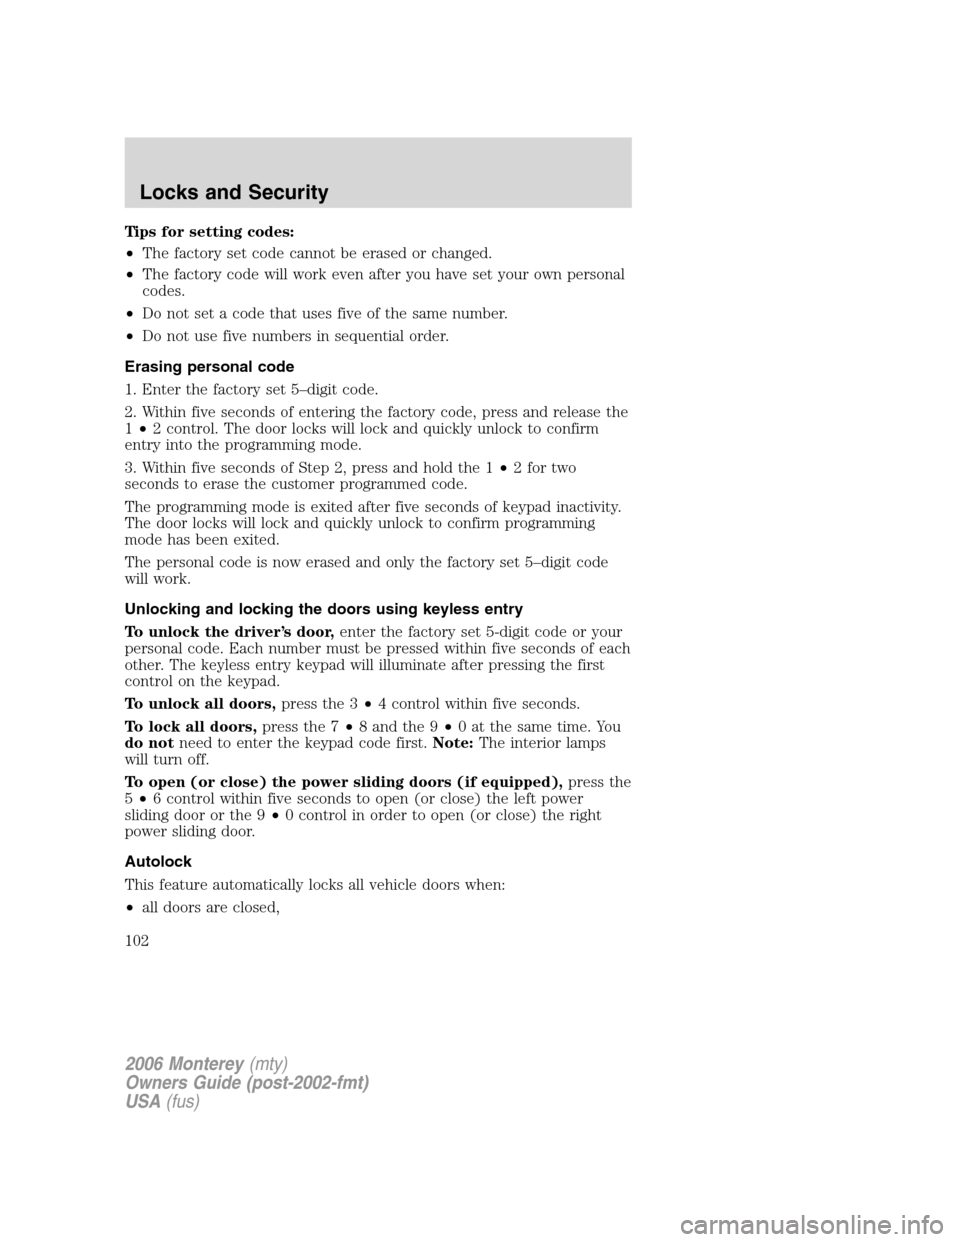 Mercury Monterey 2006  Owners Manuals Tips for setting codes:
•The factory set code cannot be erased or changed.
•The factory code will work even after you have set your own personal
codes.
•Do not set a code that uses five of the s